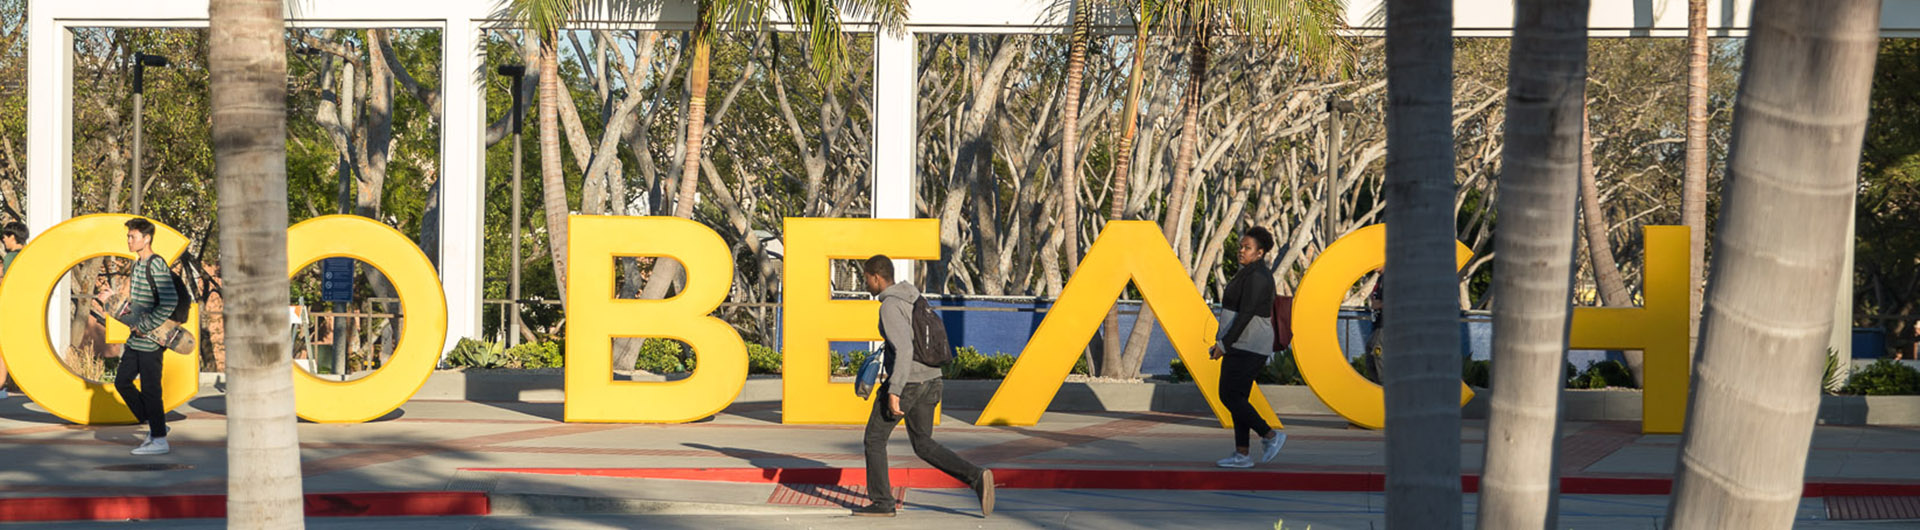 Students walk by the GO BEACH sign